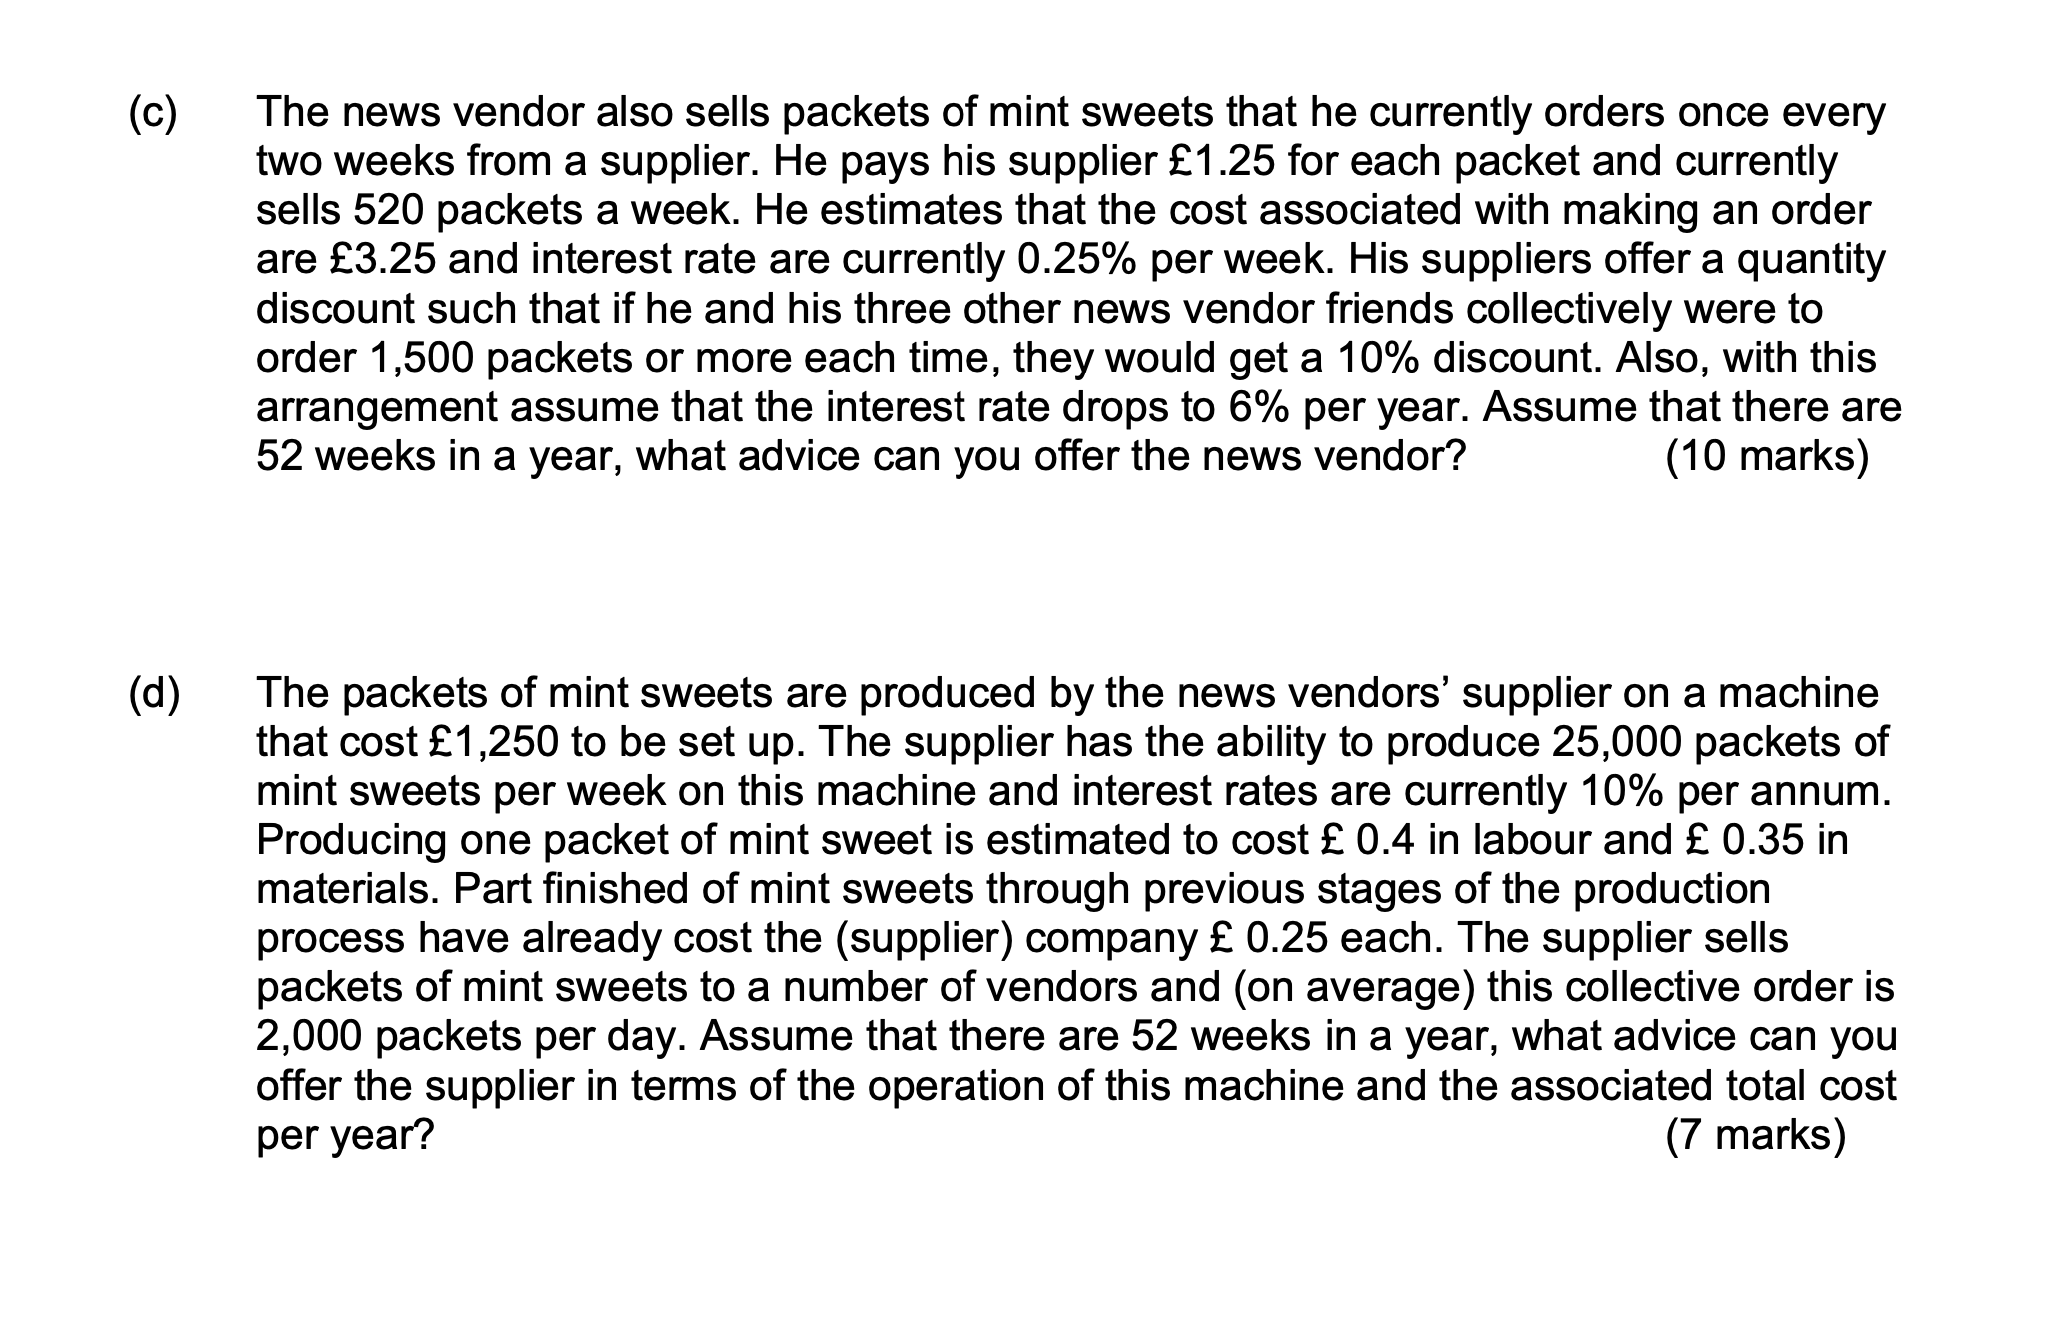 (c) (d) The news vendor also sells packets of mint sweets that he currently orders once every two weeks from